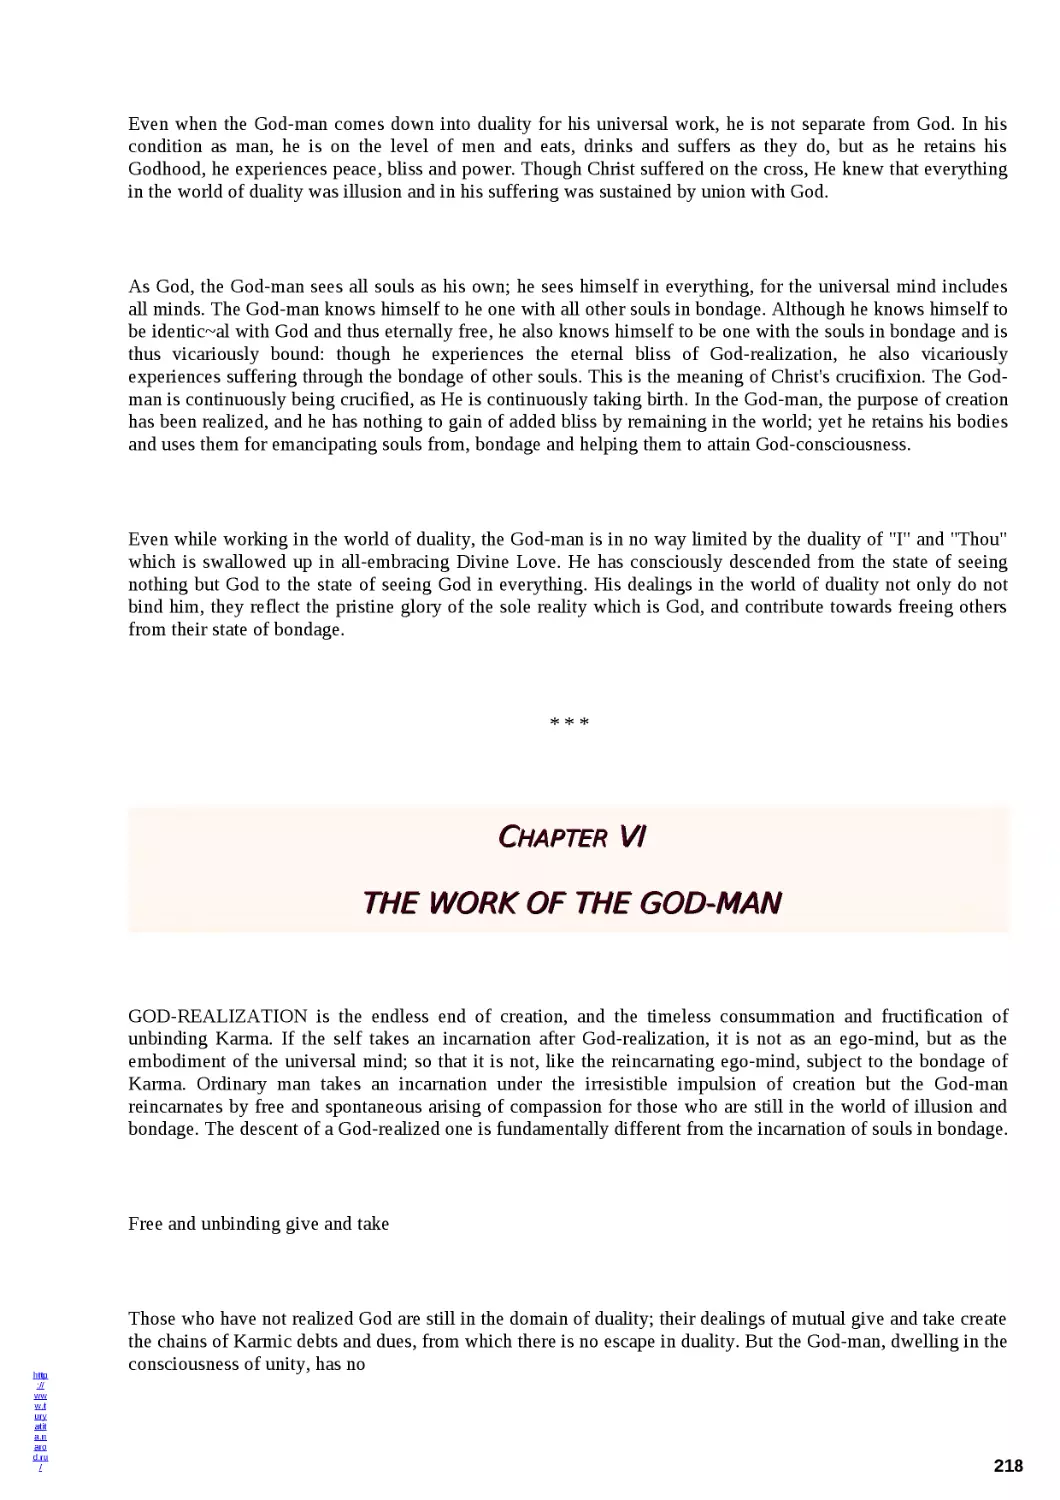 ﻿Chapter VI THE WORK OF THE GOD-MA